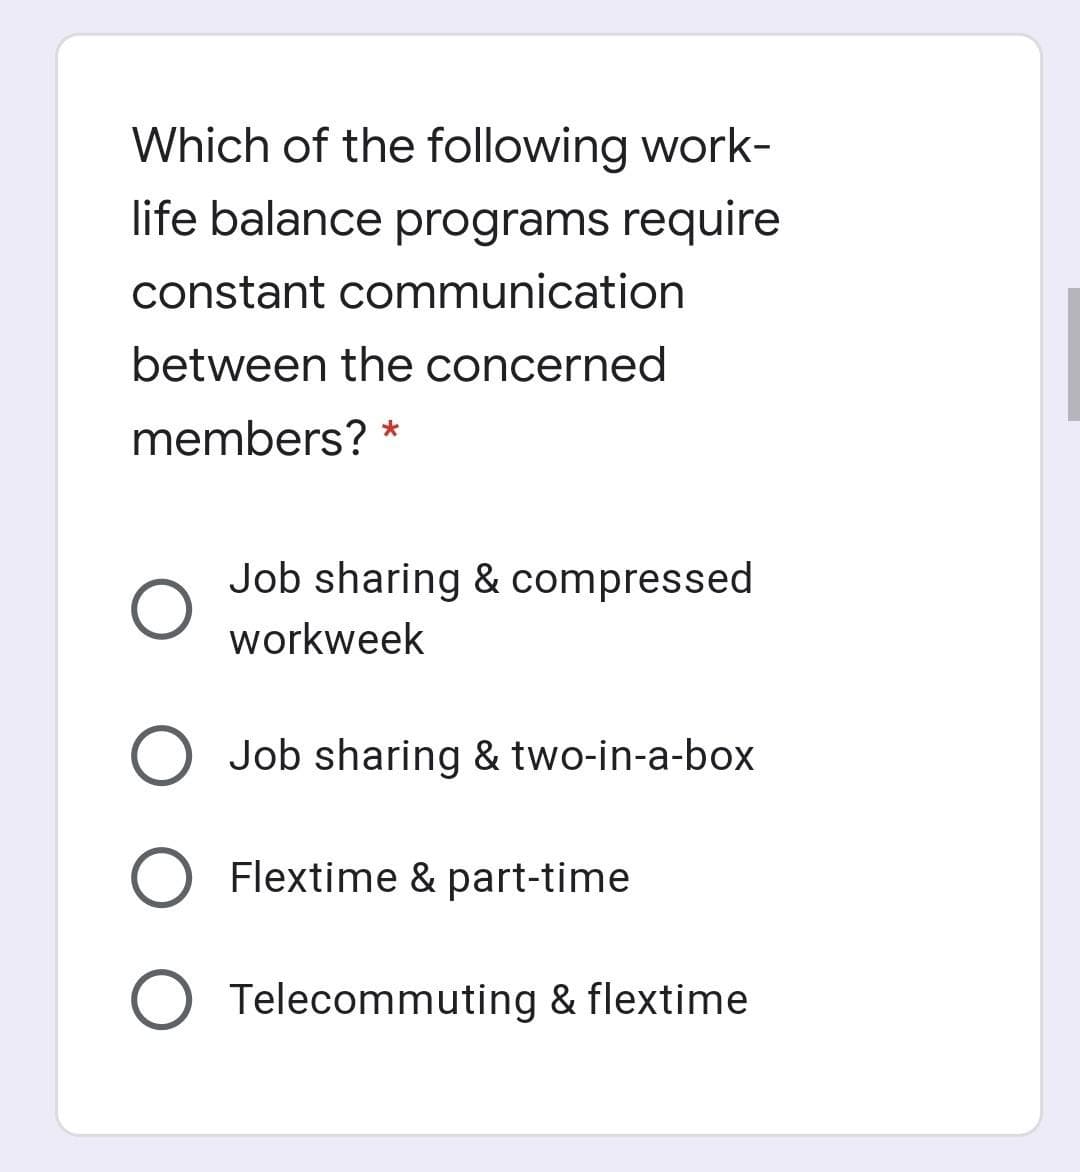 Which of the following work-
life balance programs require
constant communication
between the concerned
members?
Job sharing & compressed
workweek
Job sharing & two-in-a-box
Flextime & part-time
O Telecommuting & flextime
